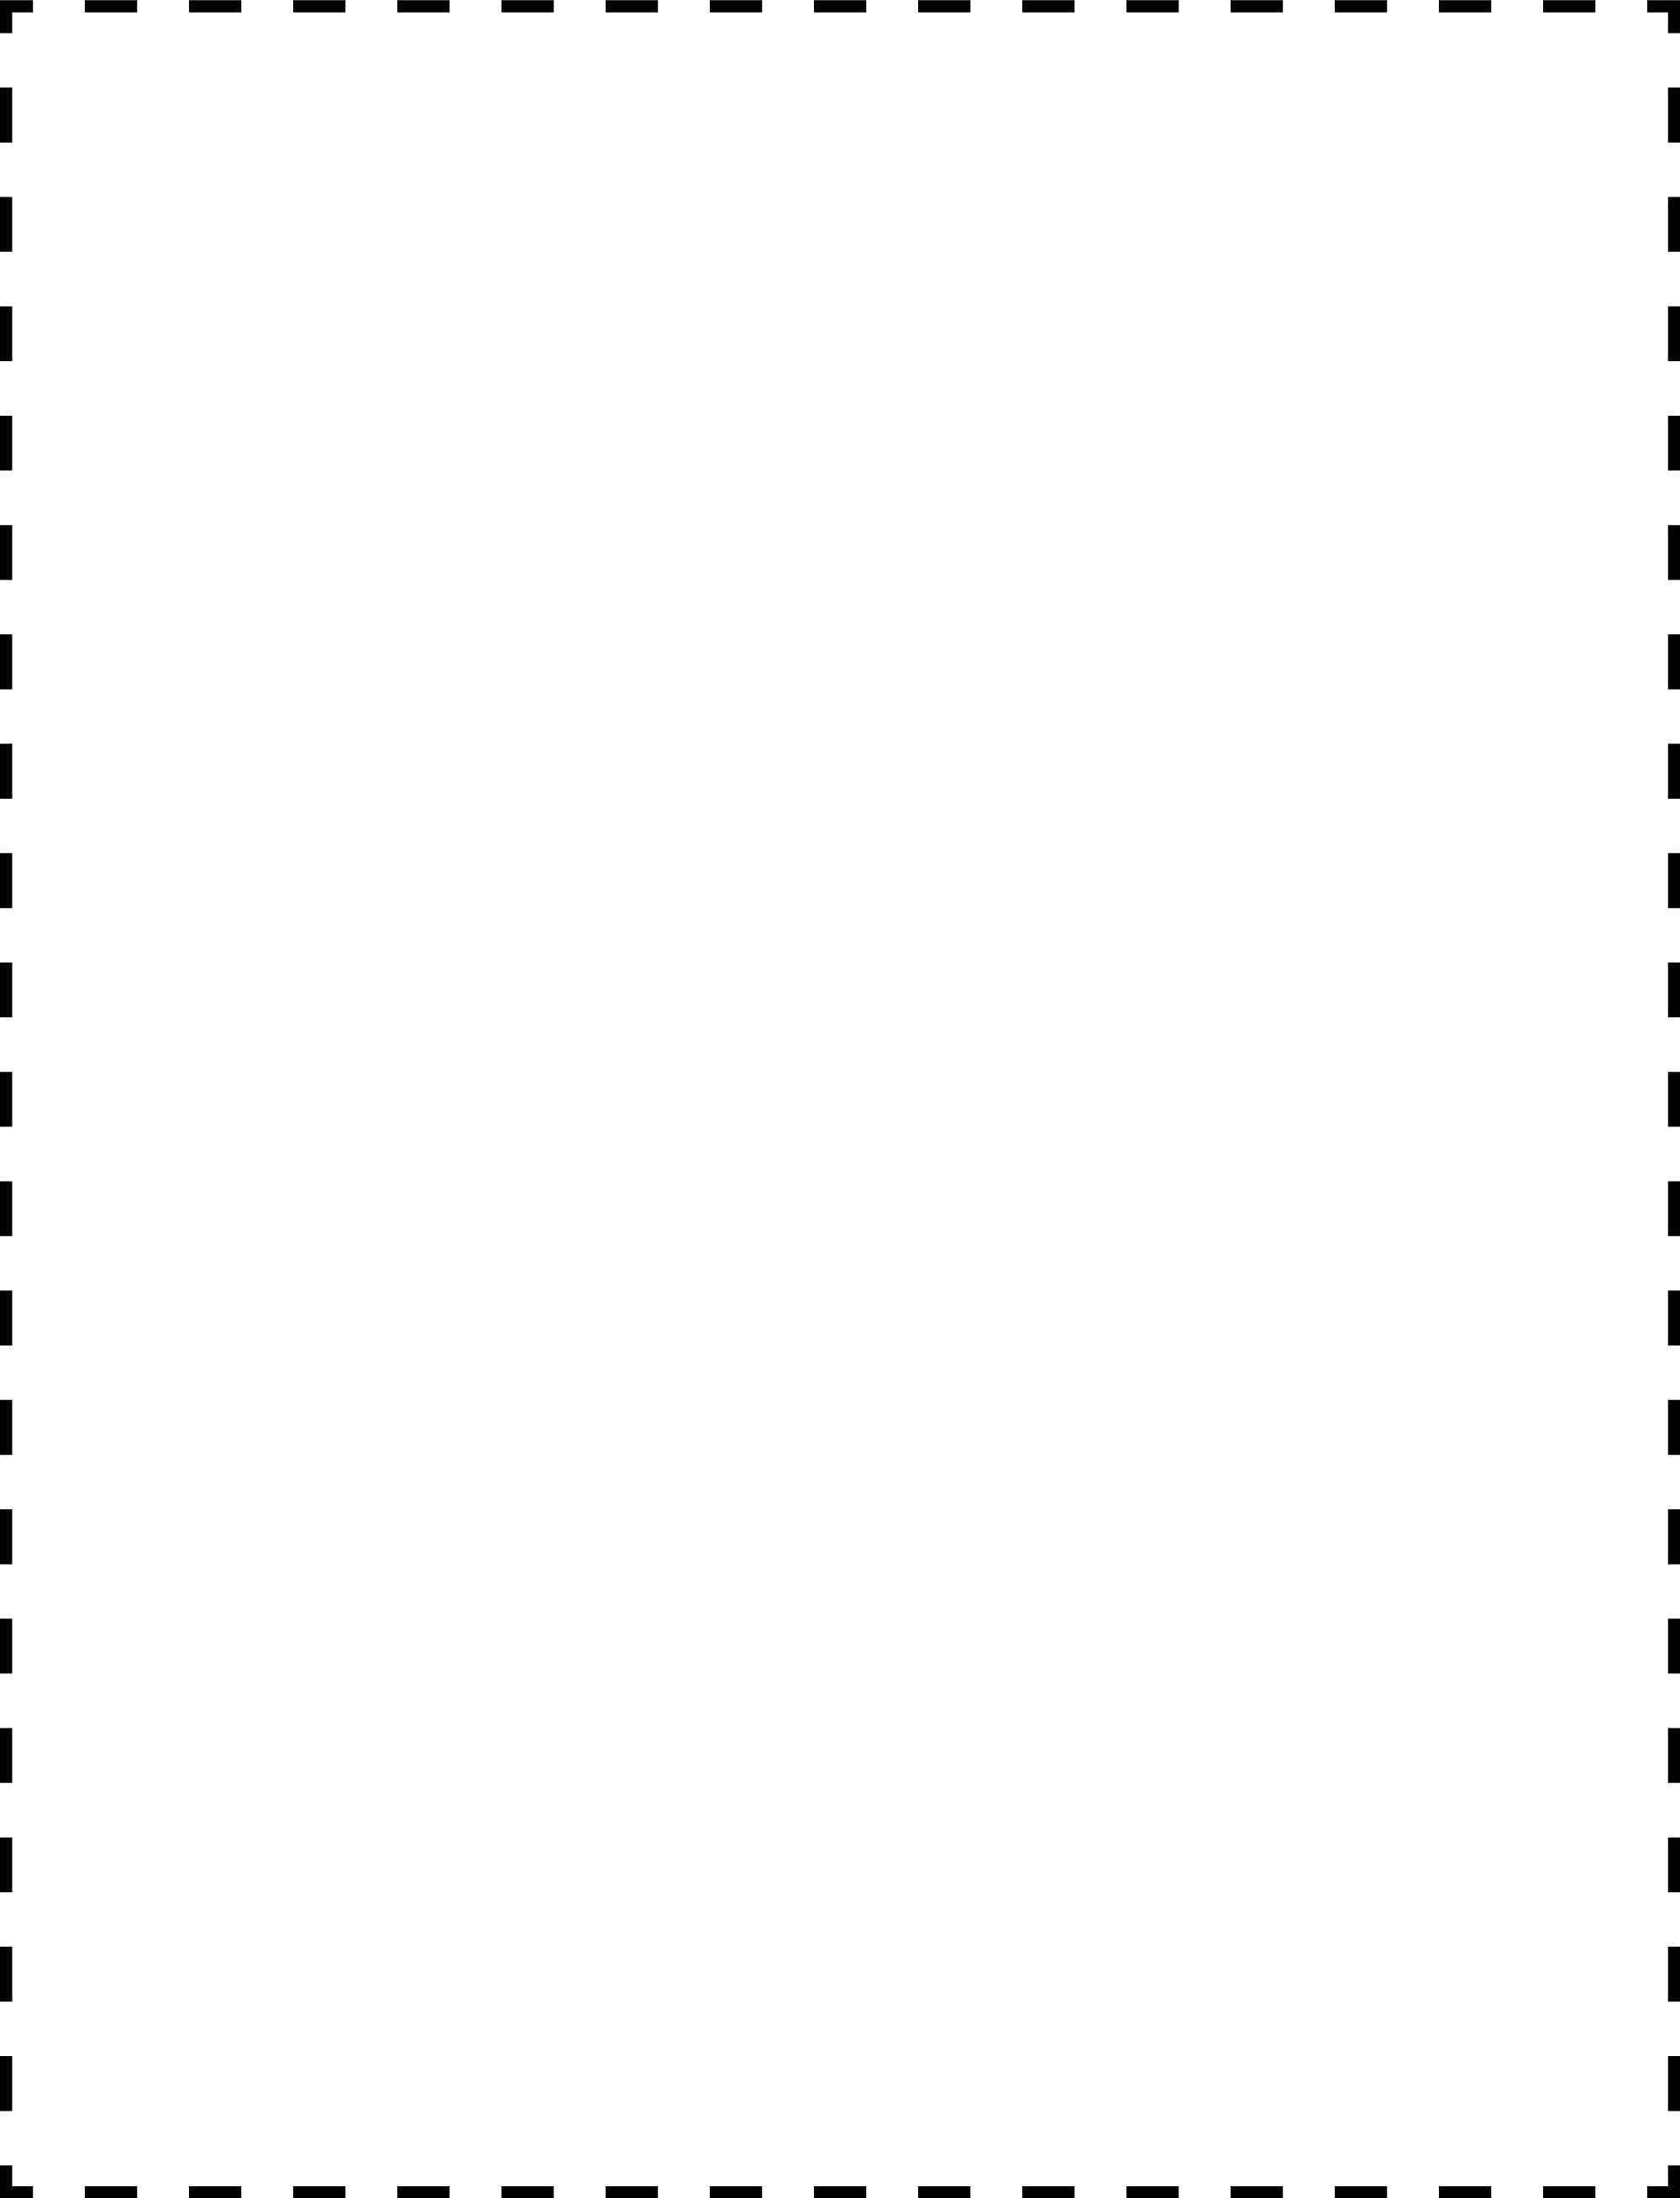 2360-coupon-outline-4x5-k.png